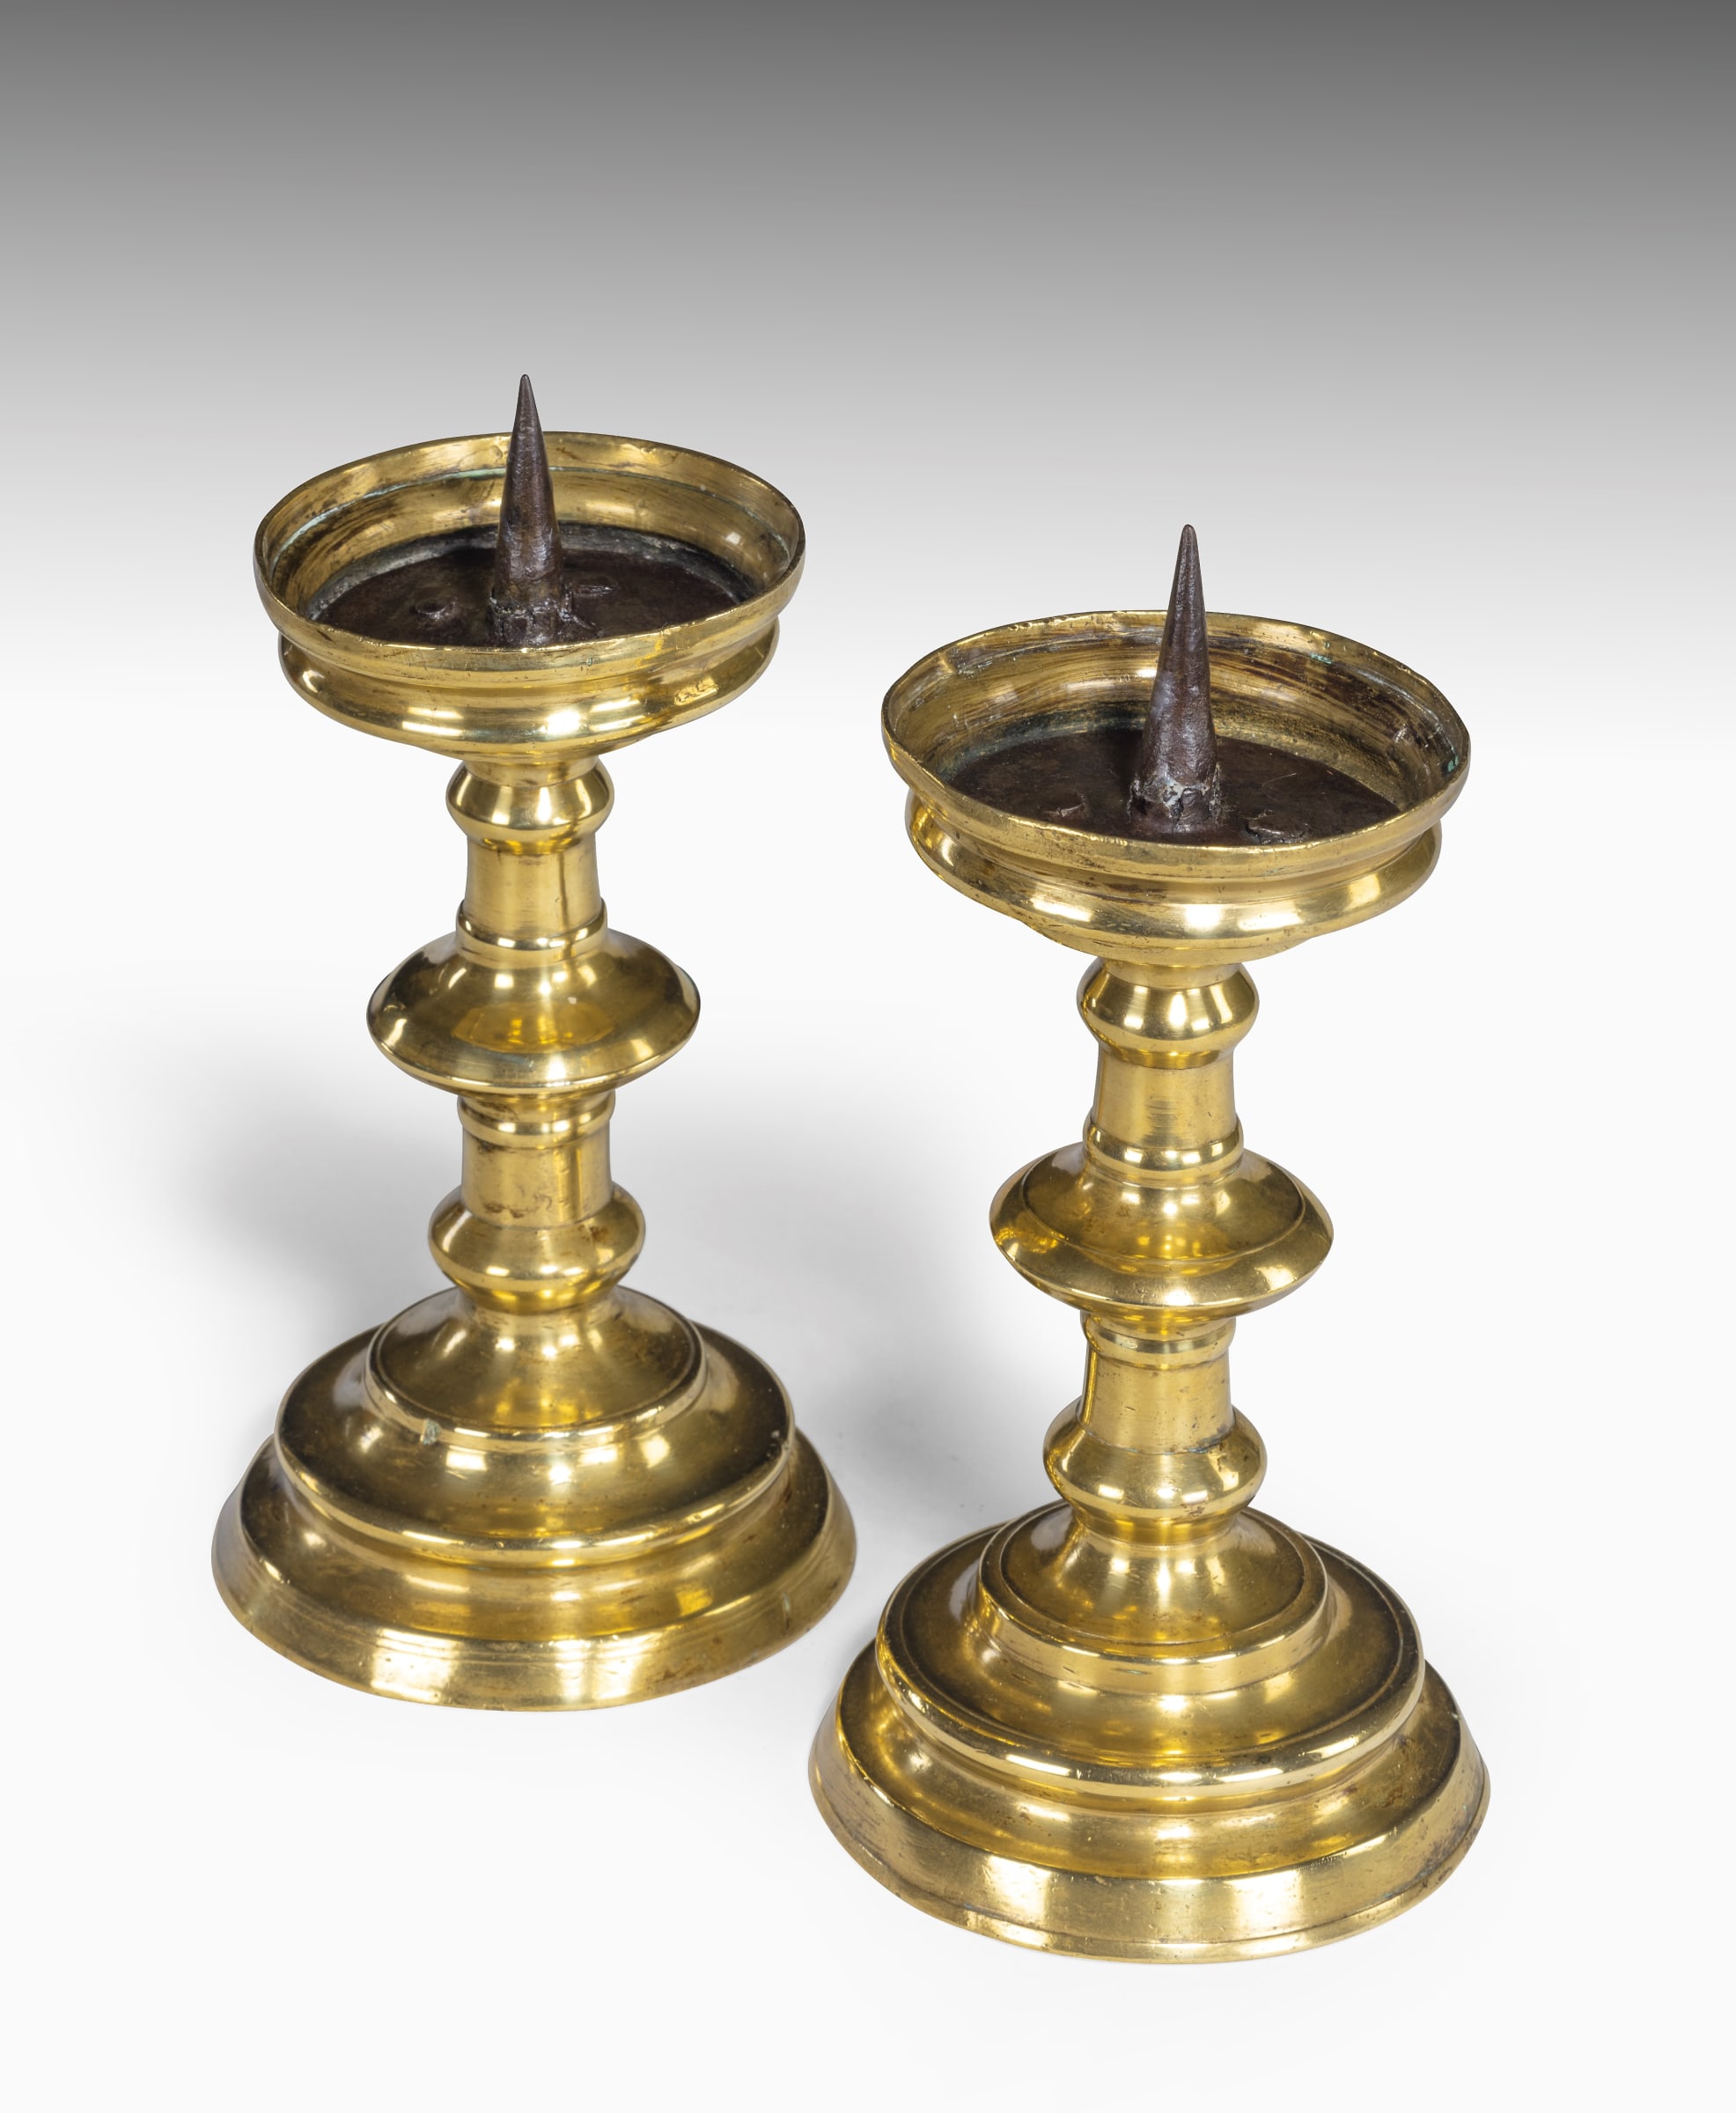 A MAGNIFICENT RARE PAIR OF MID 16THC NUREMBERG BRASS PRICKET CANDLE STICKS.  C1550 - SALES ARCHIVE